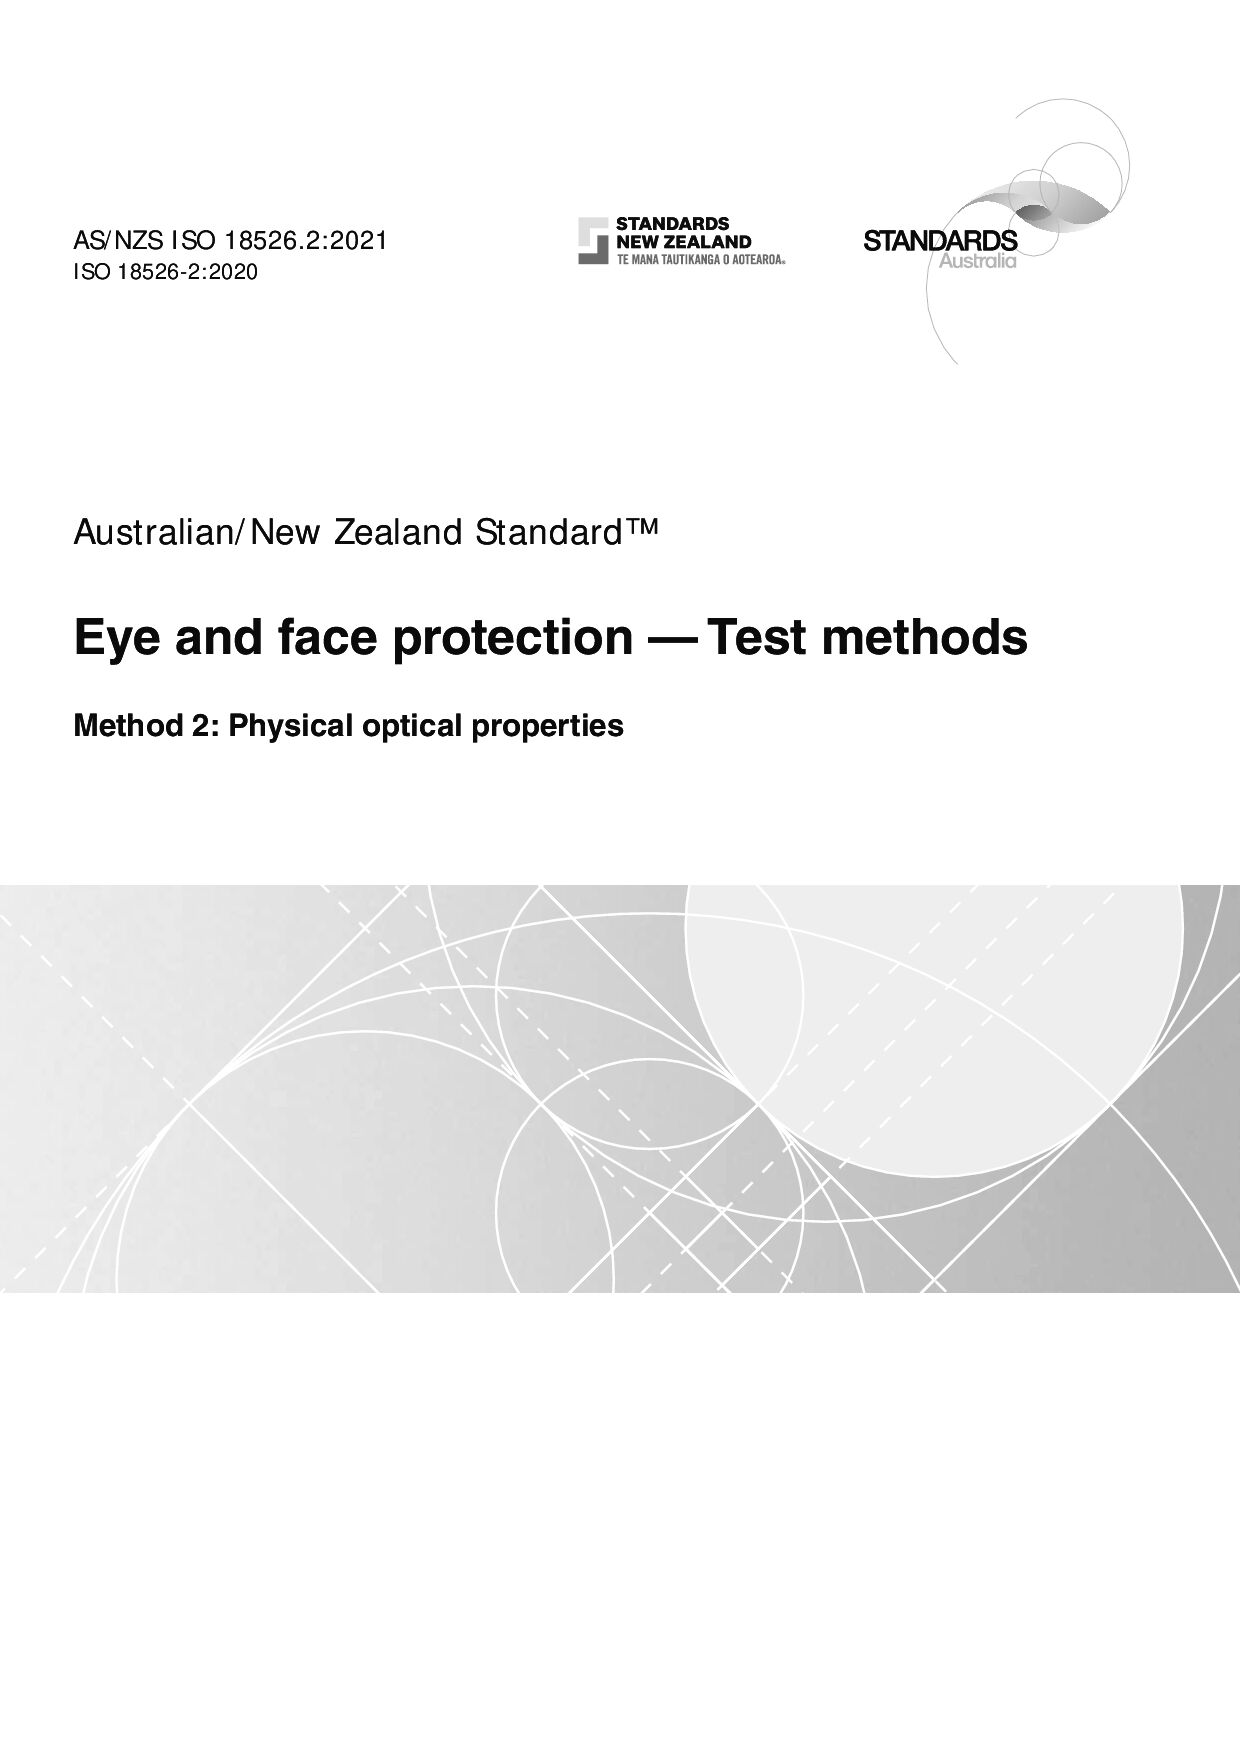 AS/NZS ISO 18526.2:2021